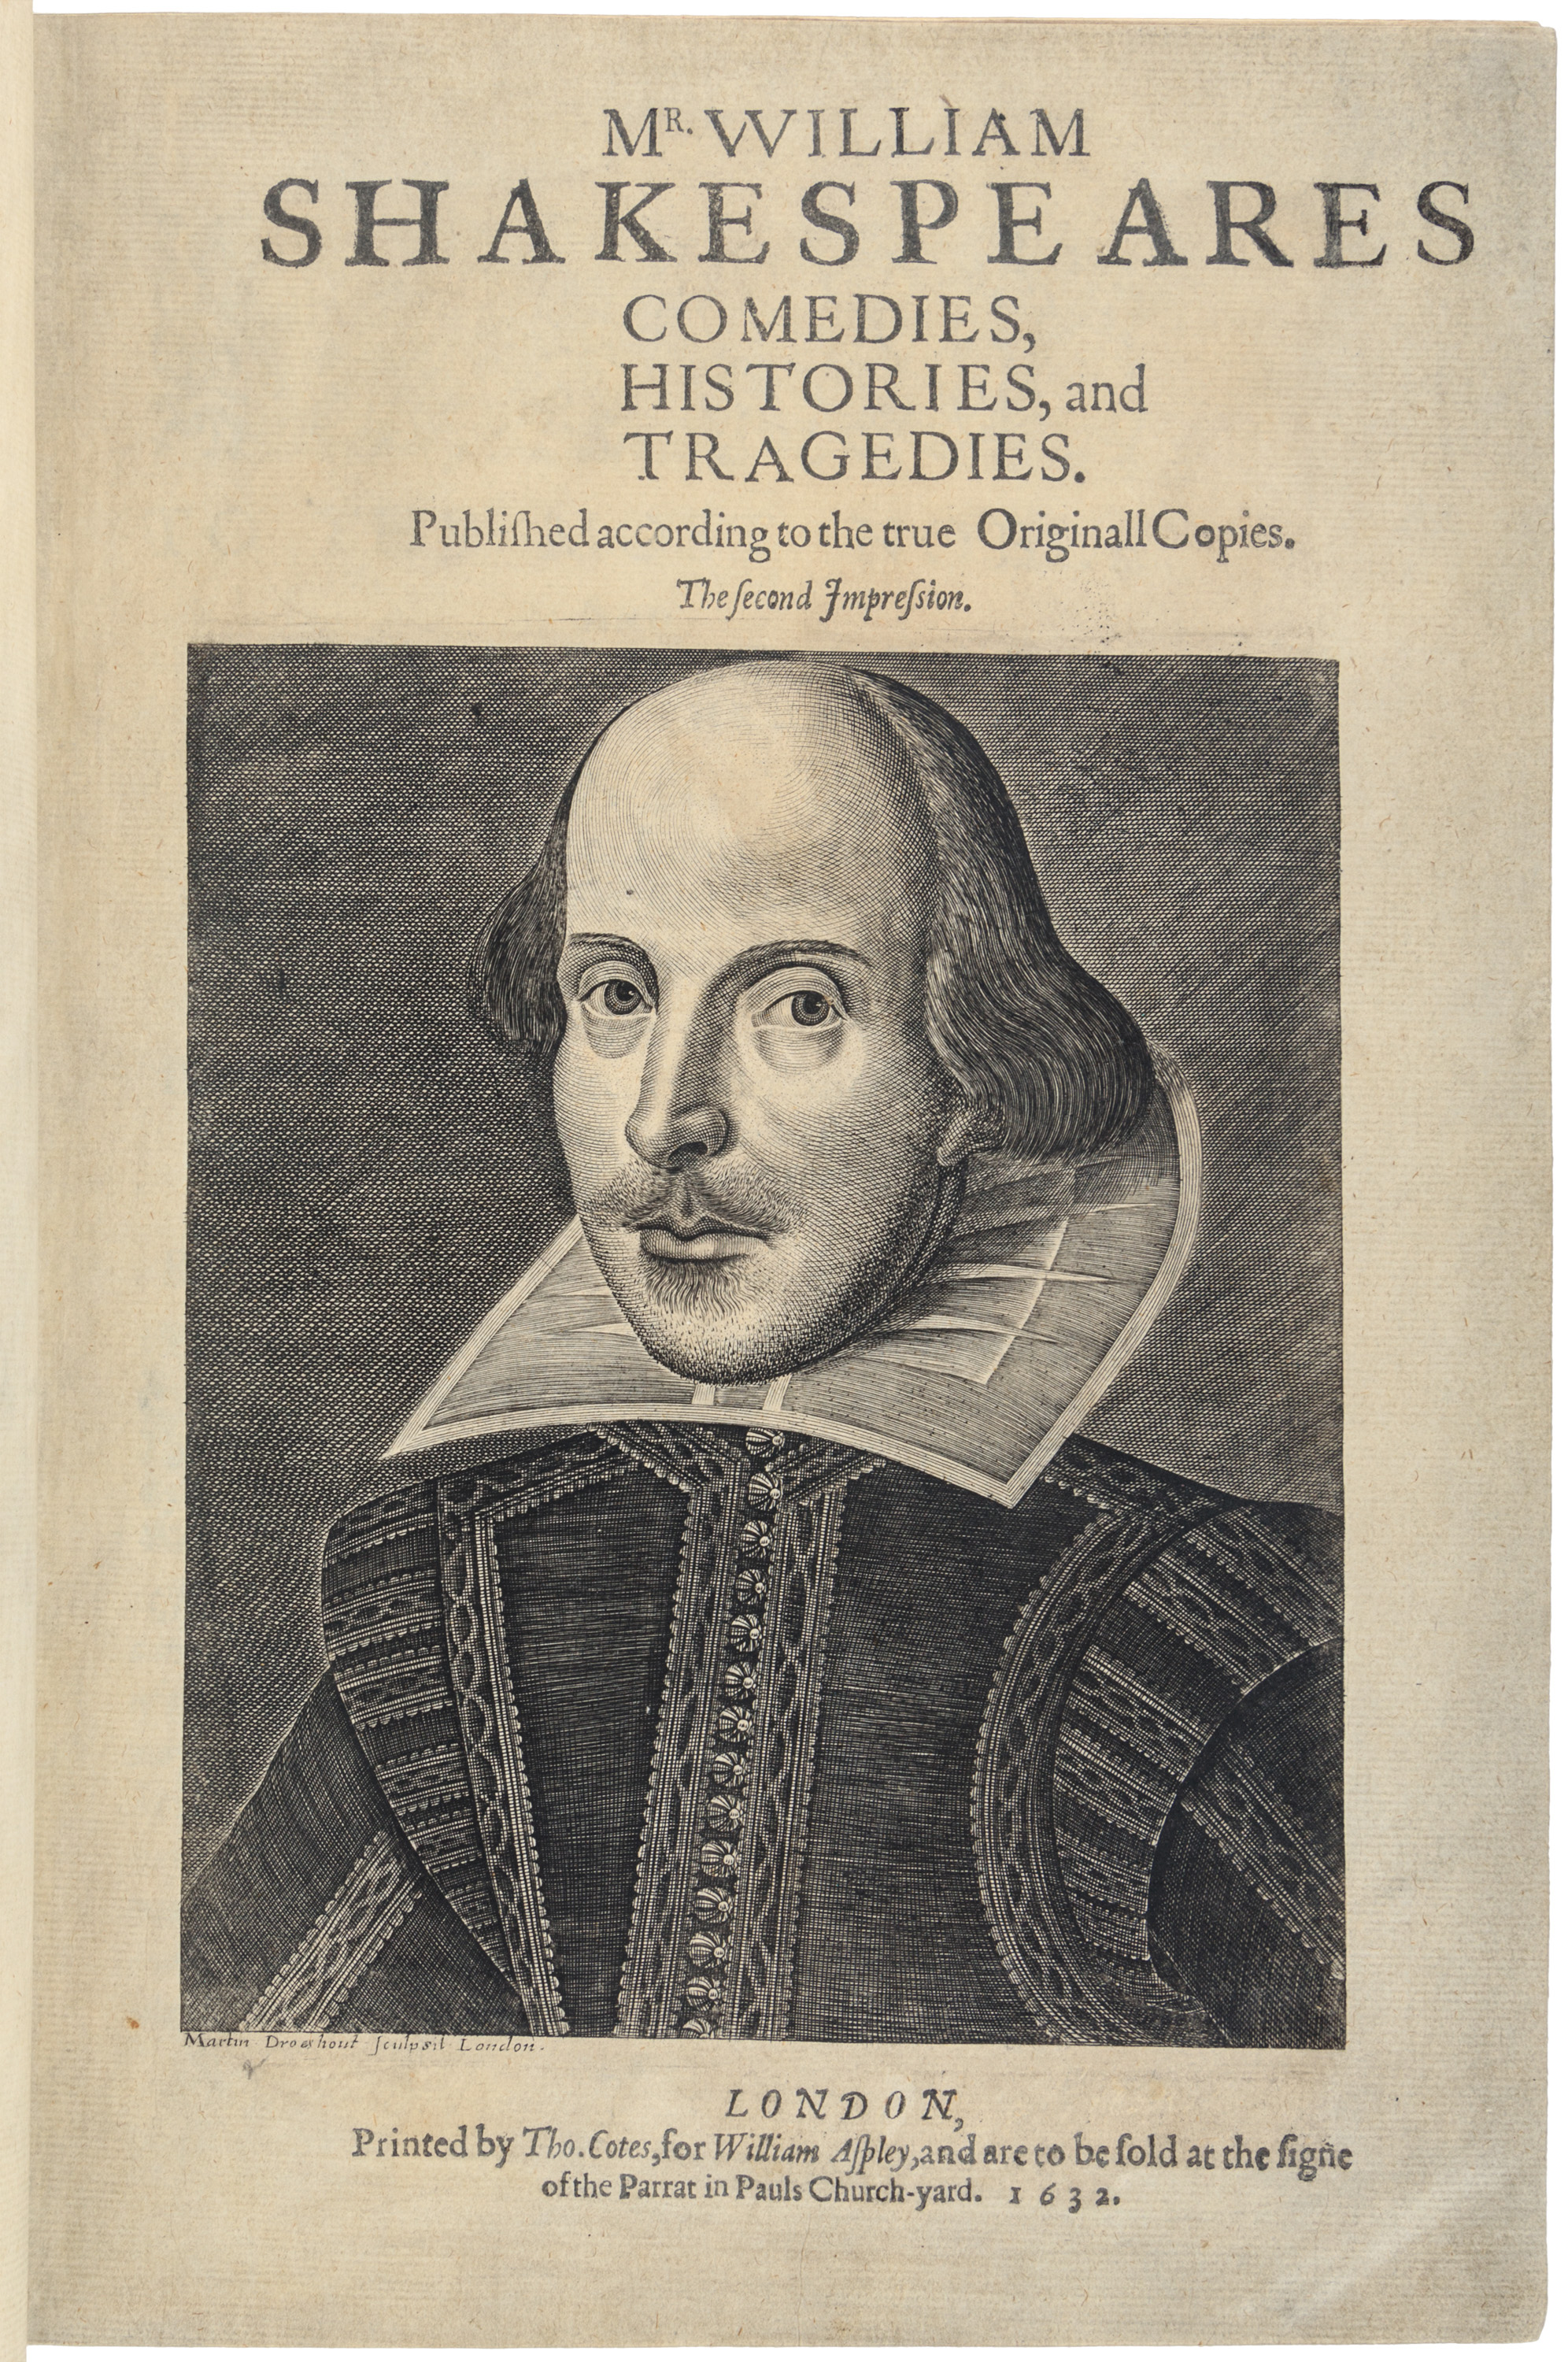 Mr William Shakespeares Comedies, Histories, and Tragedies...The Second Impression